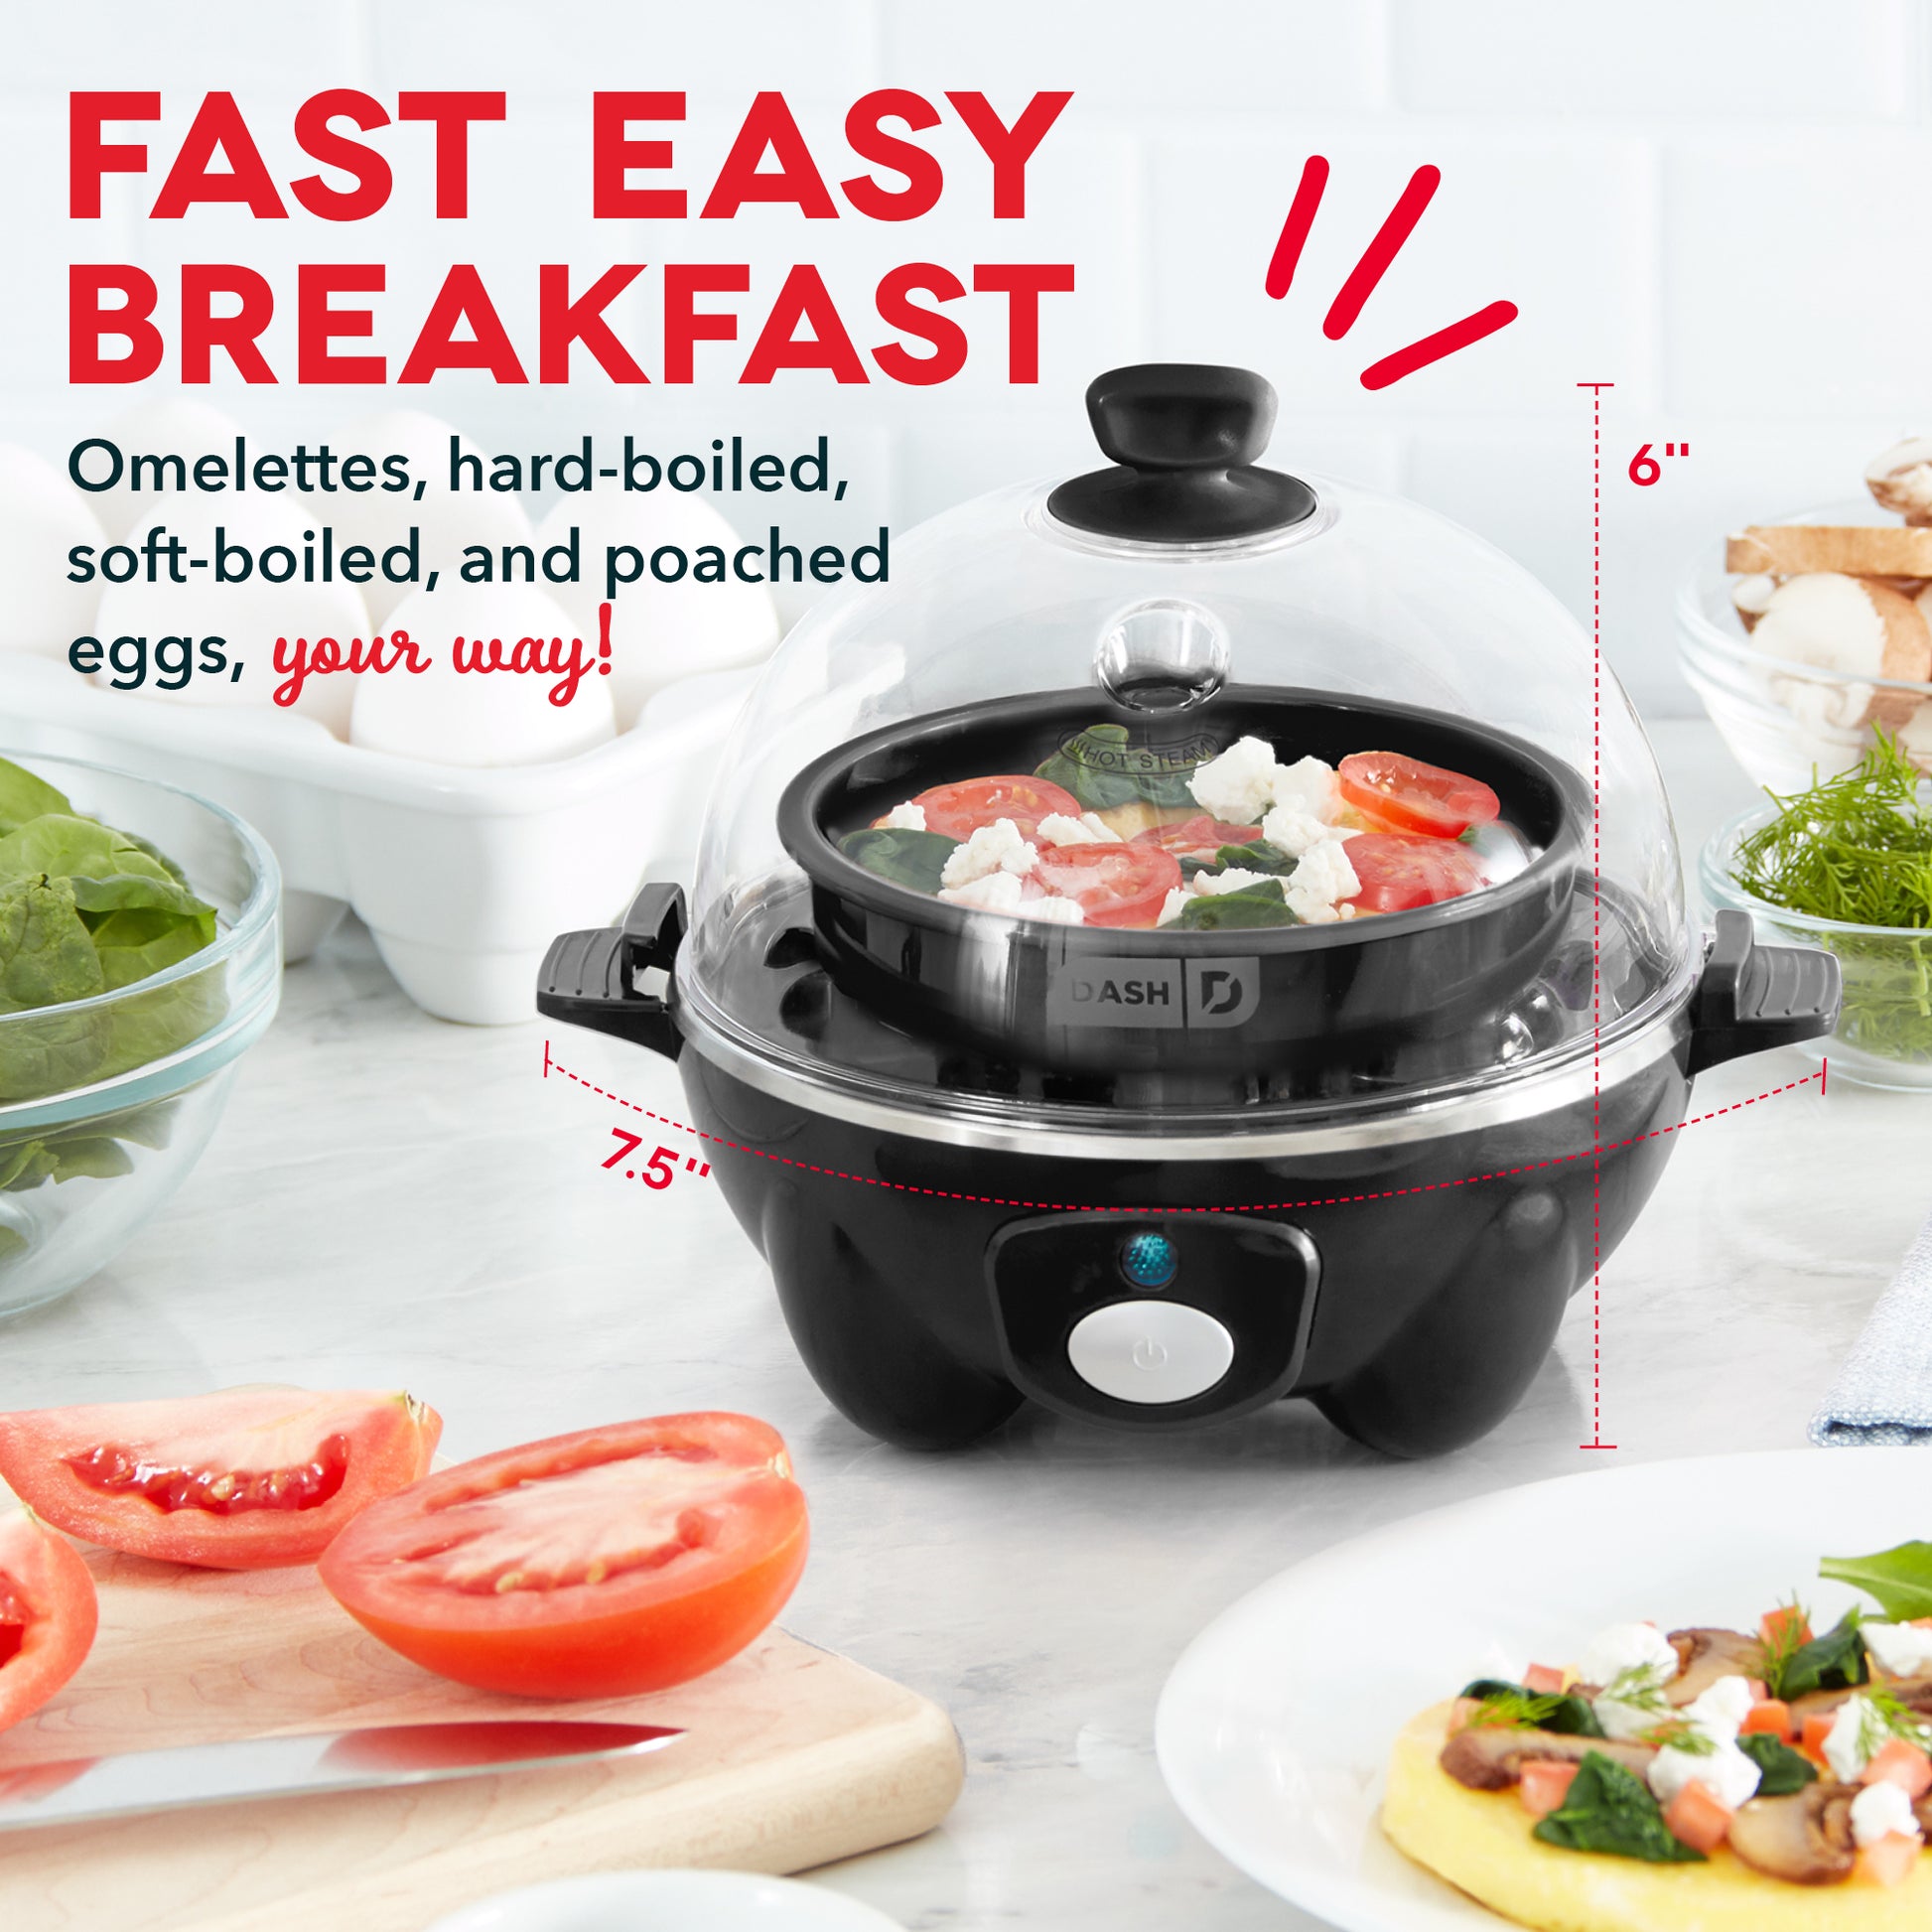 Dash Egg Cooker Review - Make Eggs Fast And Easy 